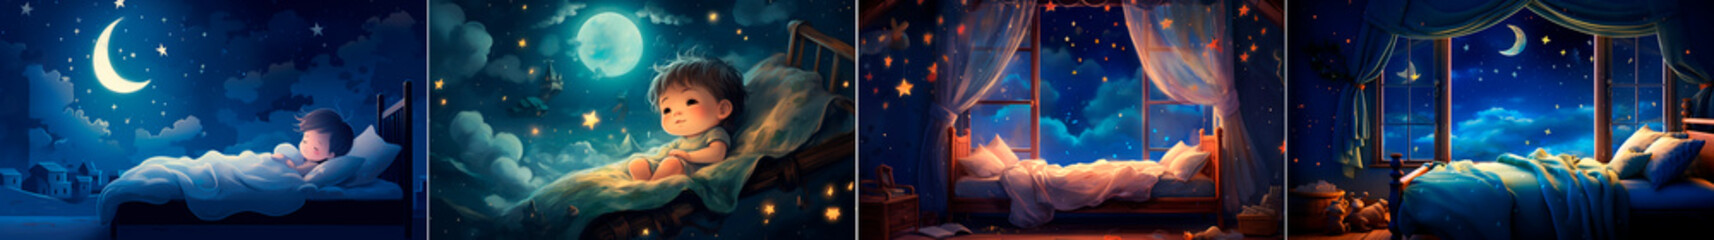 The child sleeps peacefully under the starry night sky. Illustration with vibrant image quality. The sparkling stars create a magical atmosphere. A large window offers panoramic views.